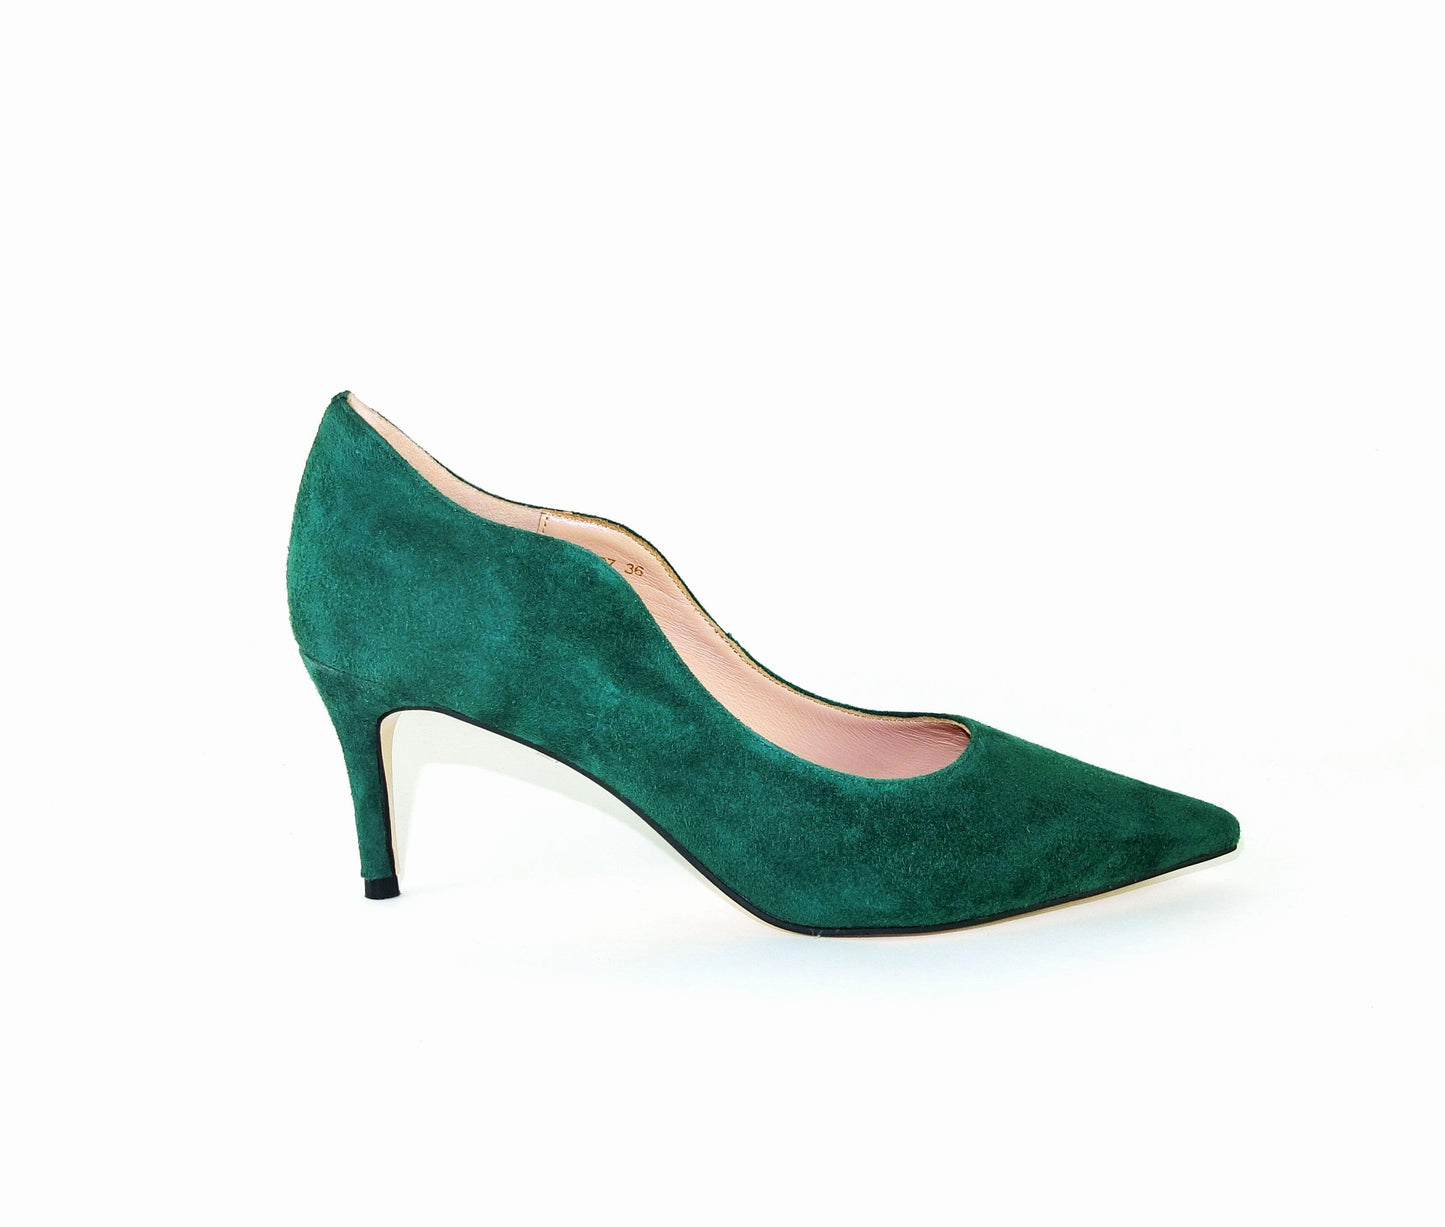 SS23007 Leather court shoes with curve design- Dark green ladies shoes Sam Star shoes Dark green 36/3 